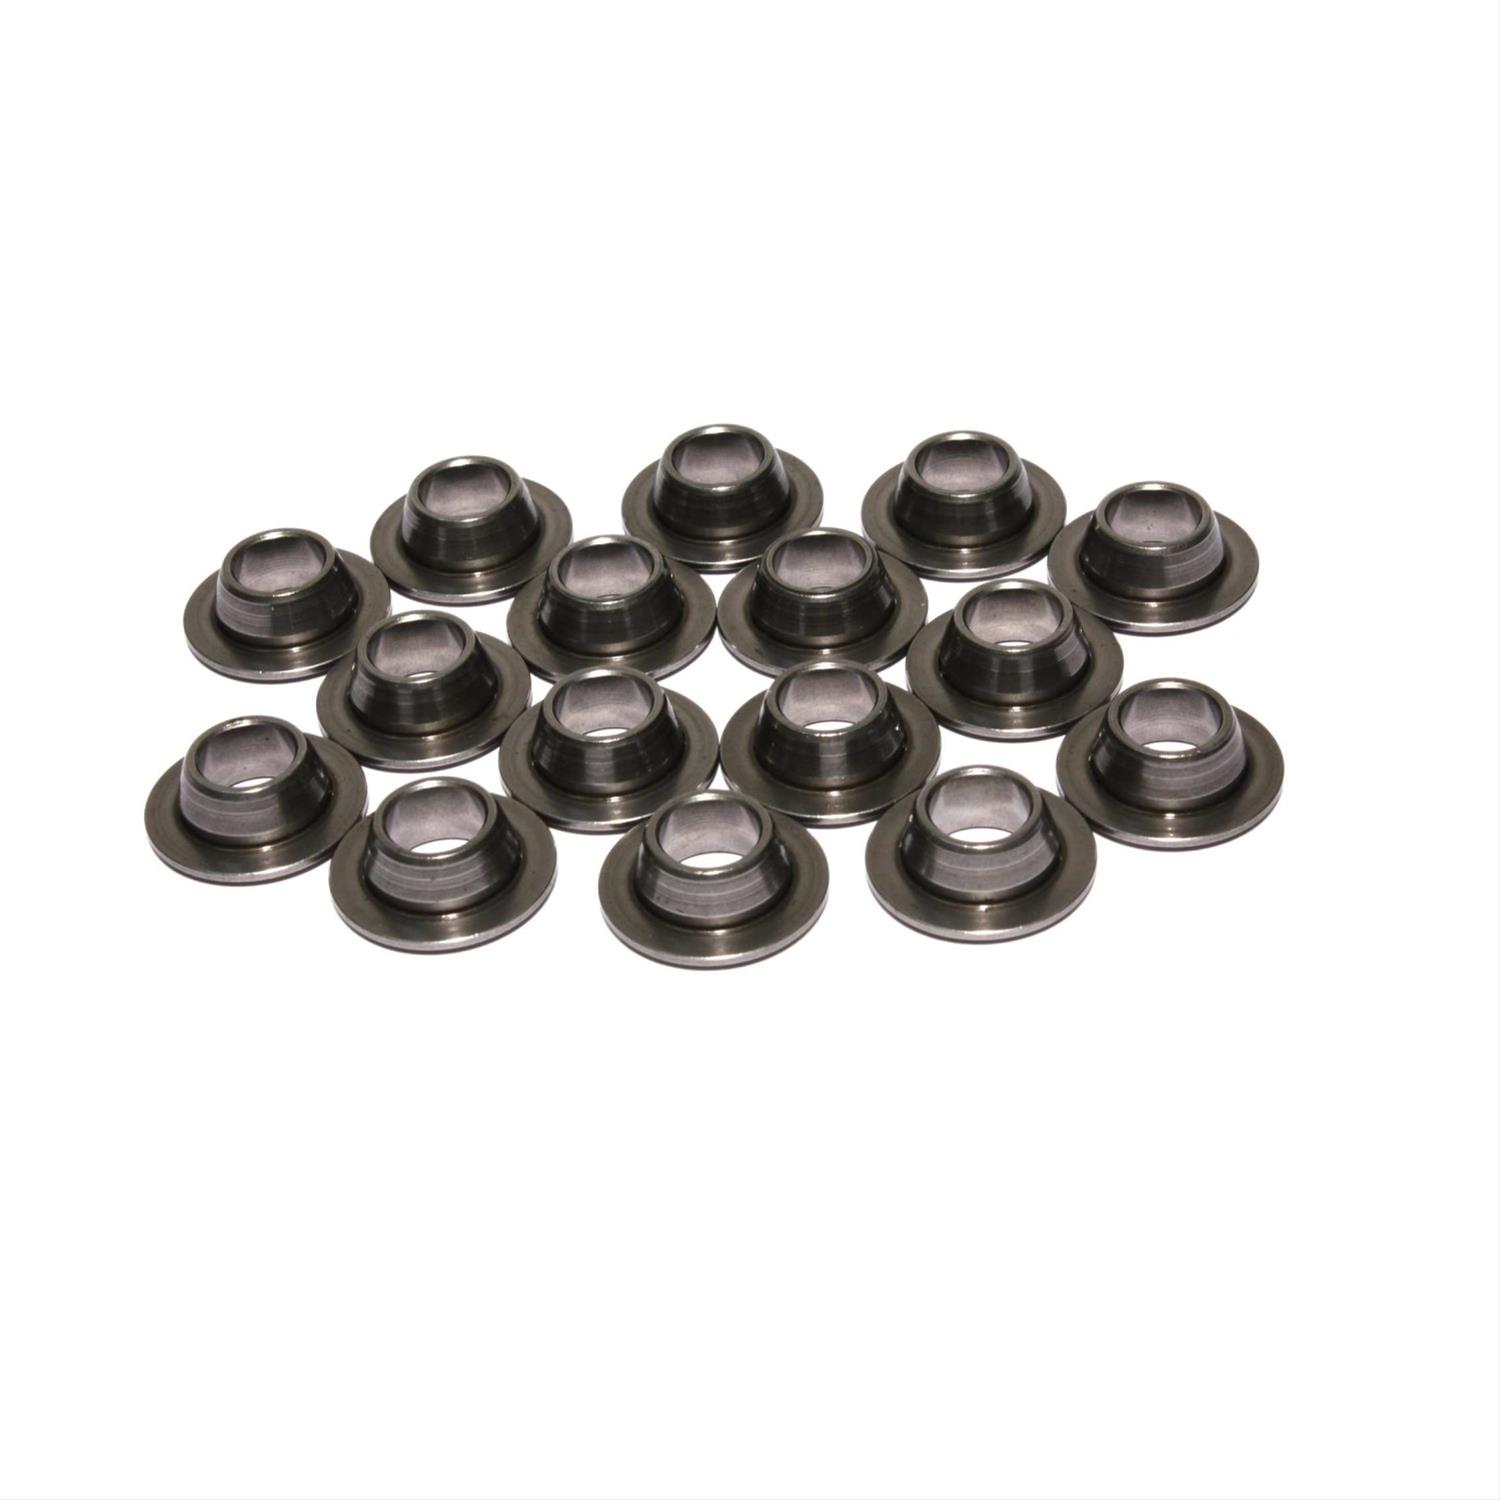 COMP Cams 1787-16 COMP Cams Steel Valve Spring Retainers Summit Racing